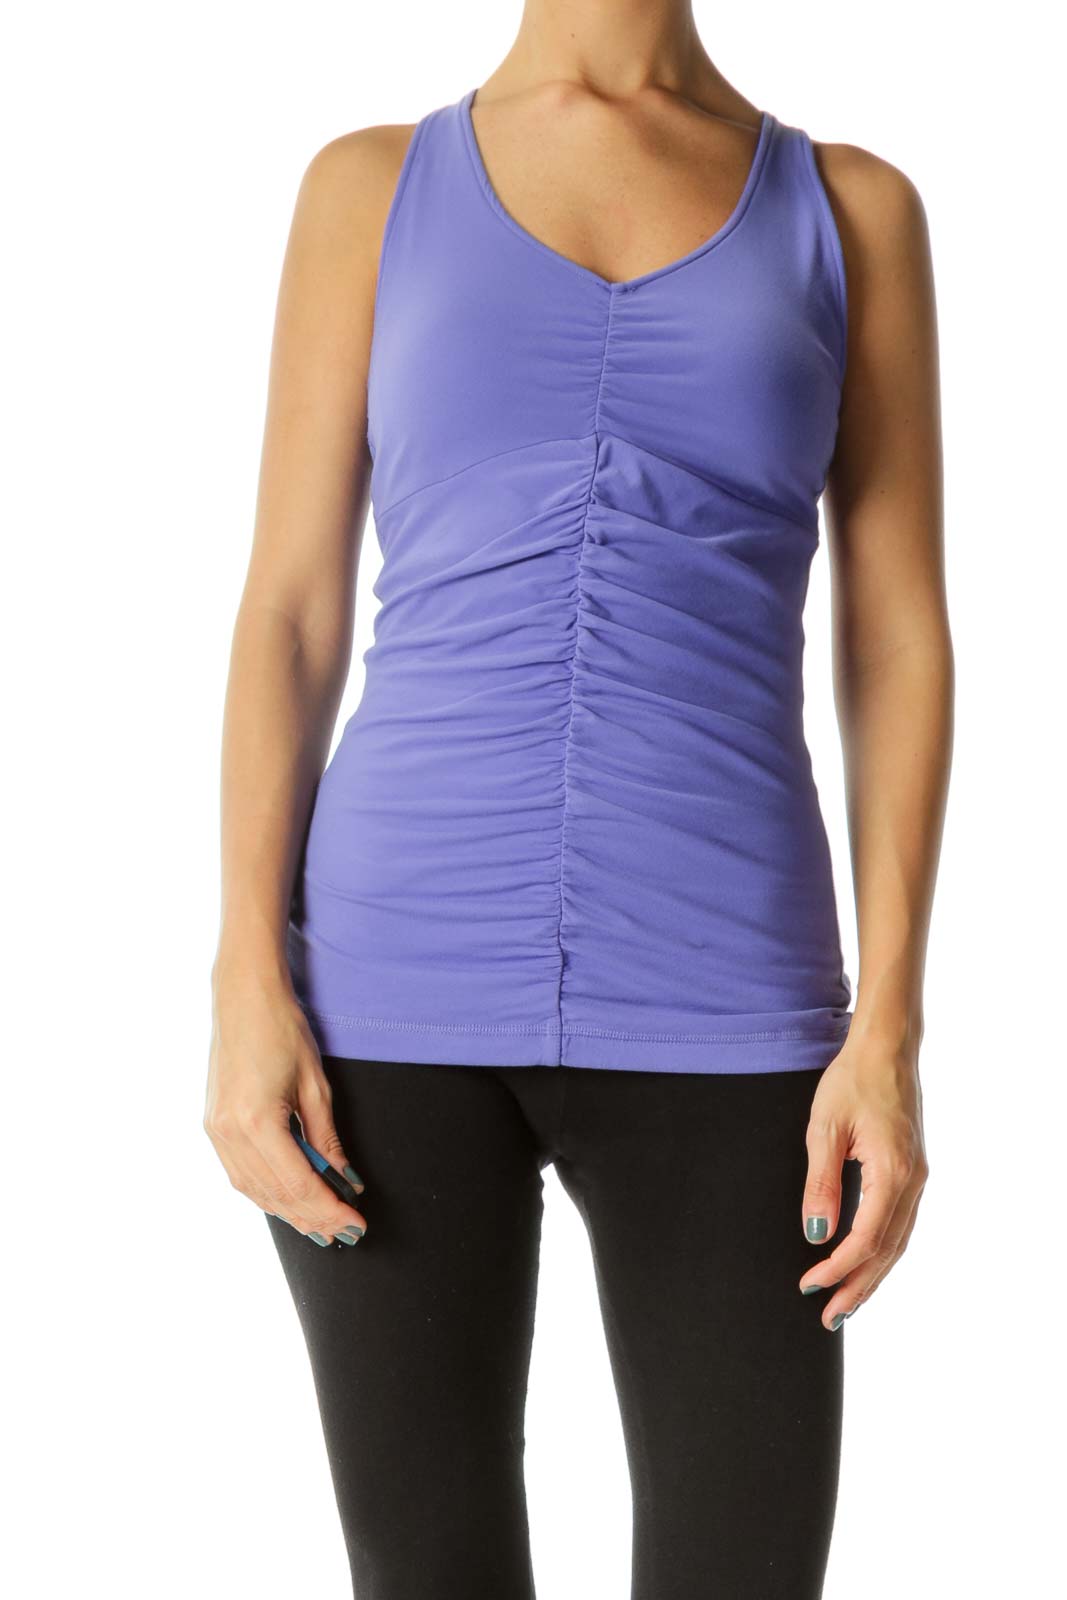 Purple V-Neck Scrunched Detail Sports Tank Top with Built-In Support Bra Front